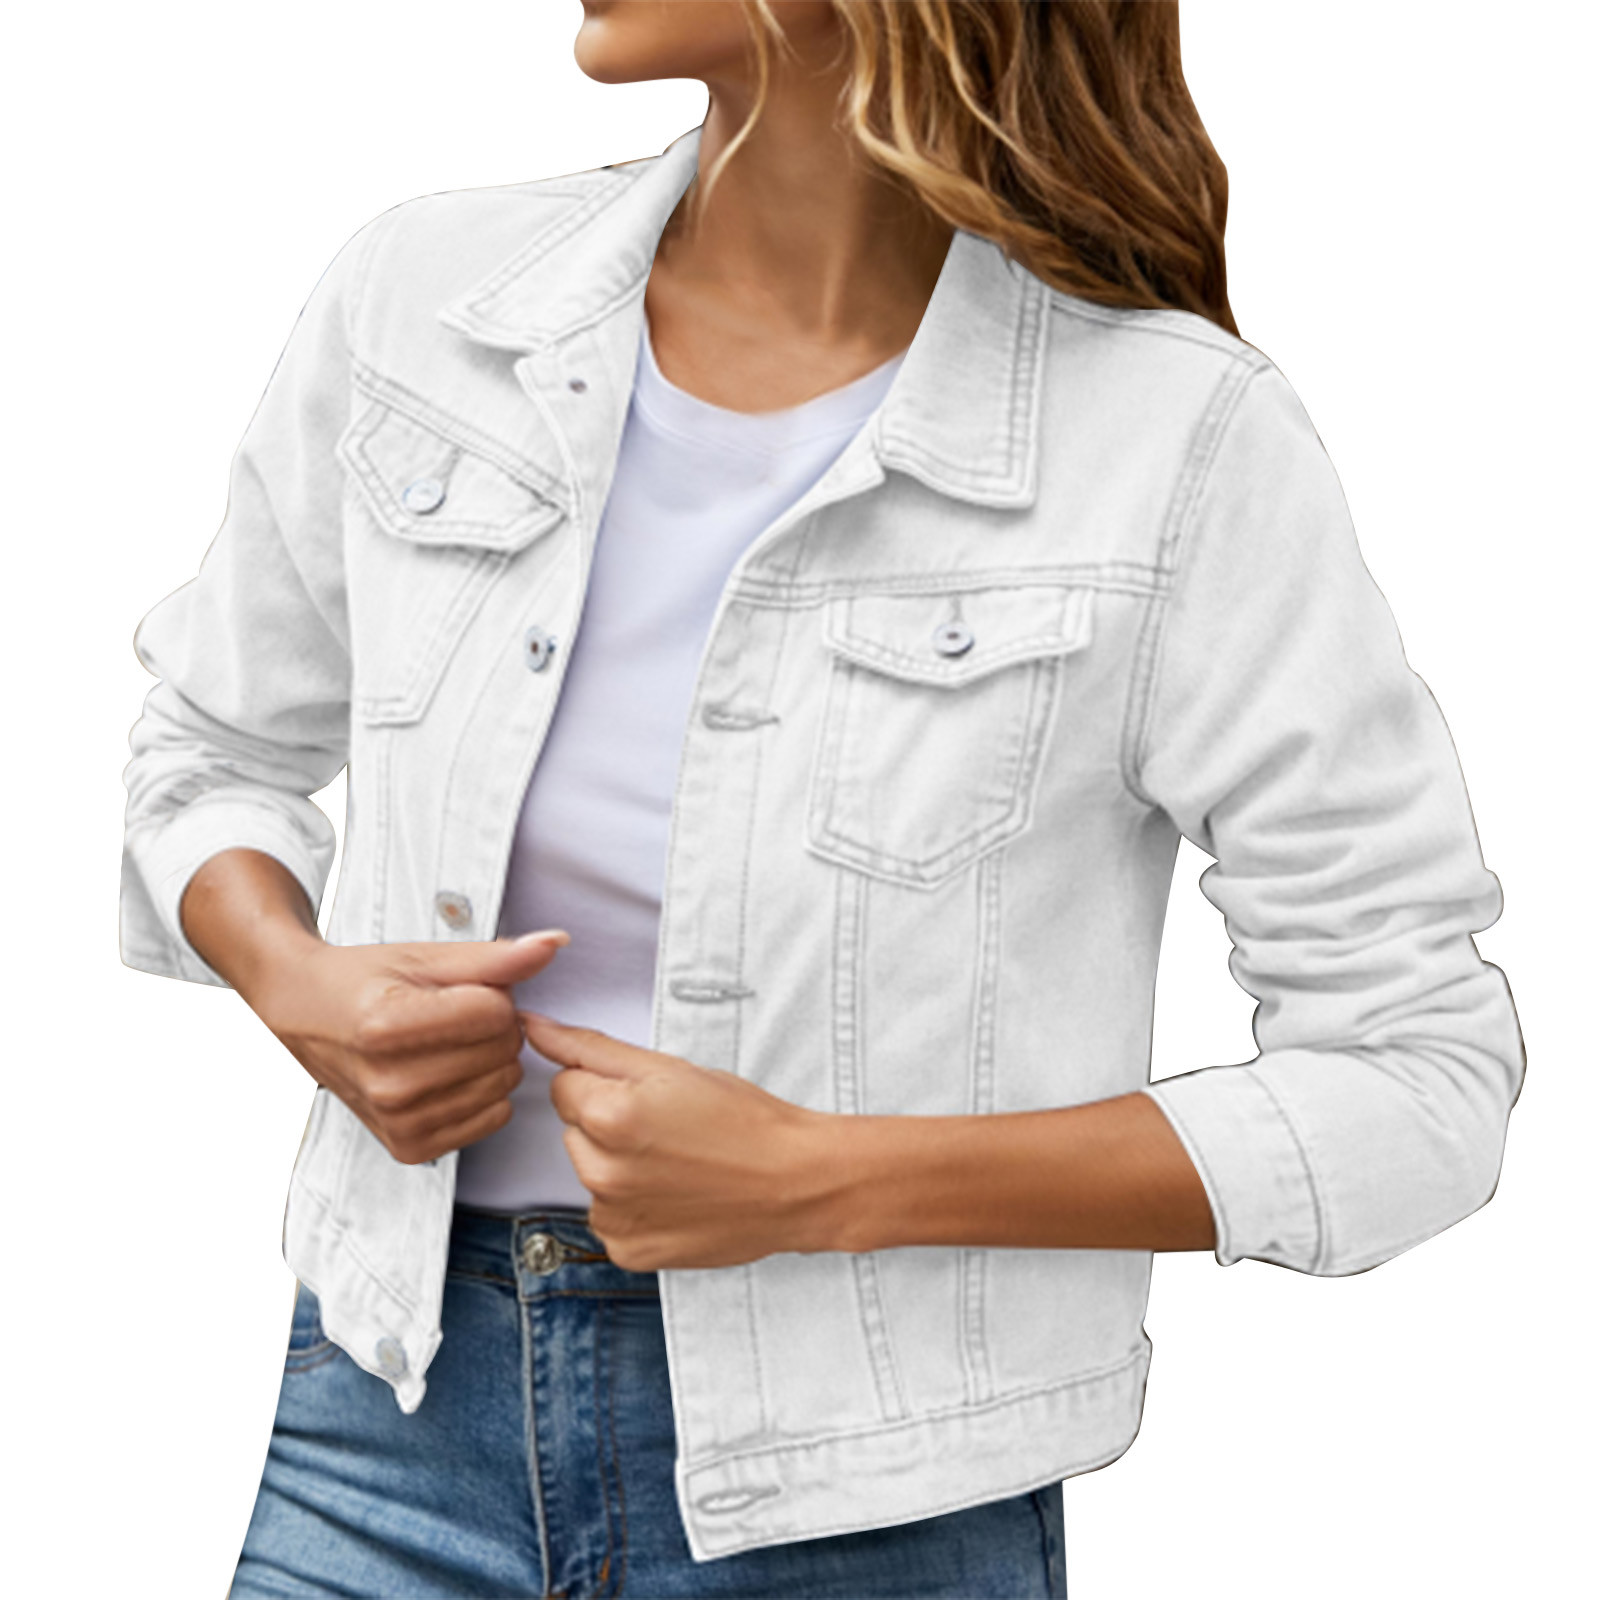 iOPQO womens sweaters Women's Basic Solid Color Button Down Denim Cotton Jacket With Pockets Denim Jacket Coat Women's Denim Jackets White S - image 1 of 8